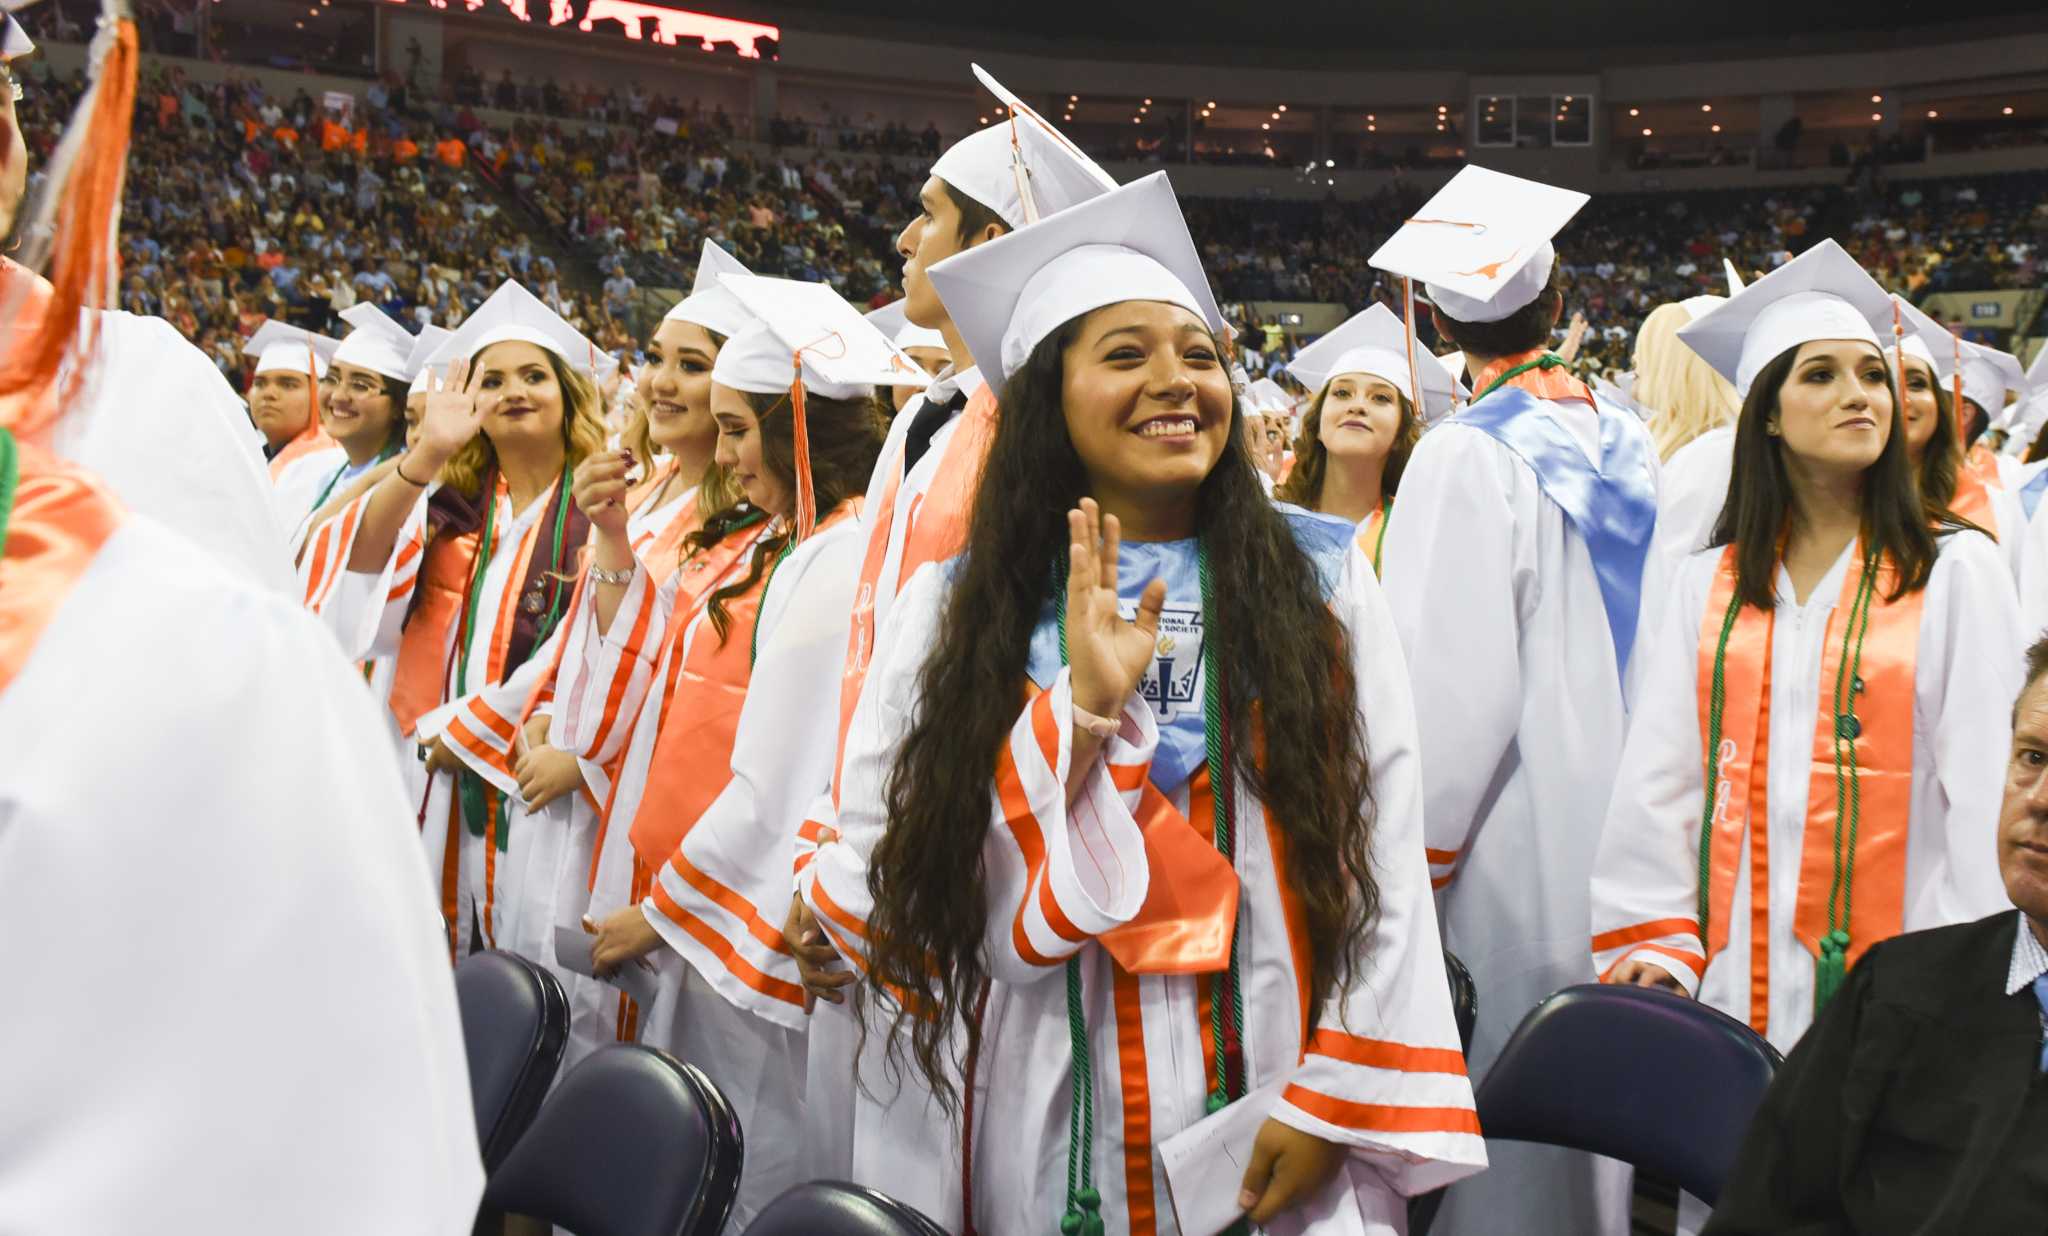 United ISD sets plan for outdoor graduation in June